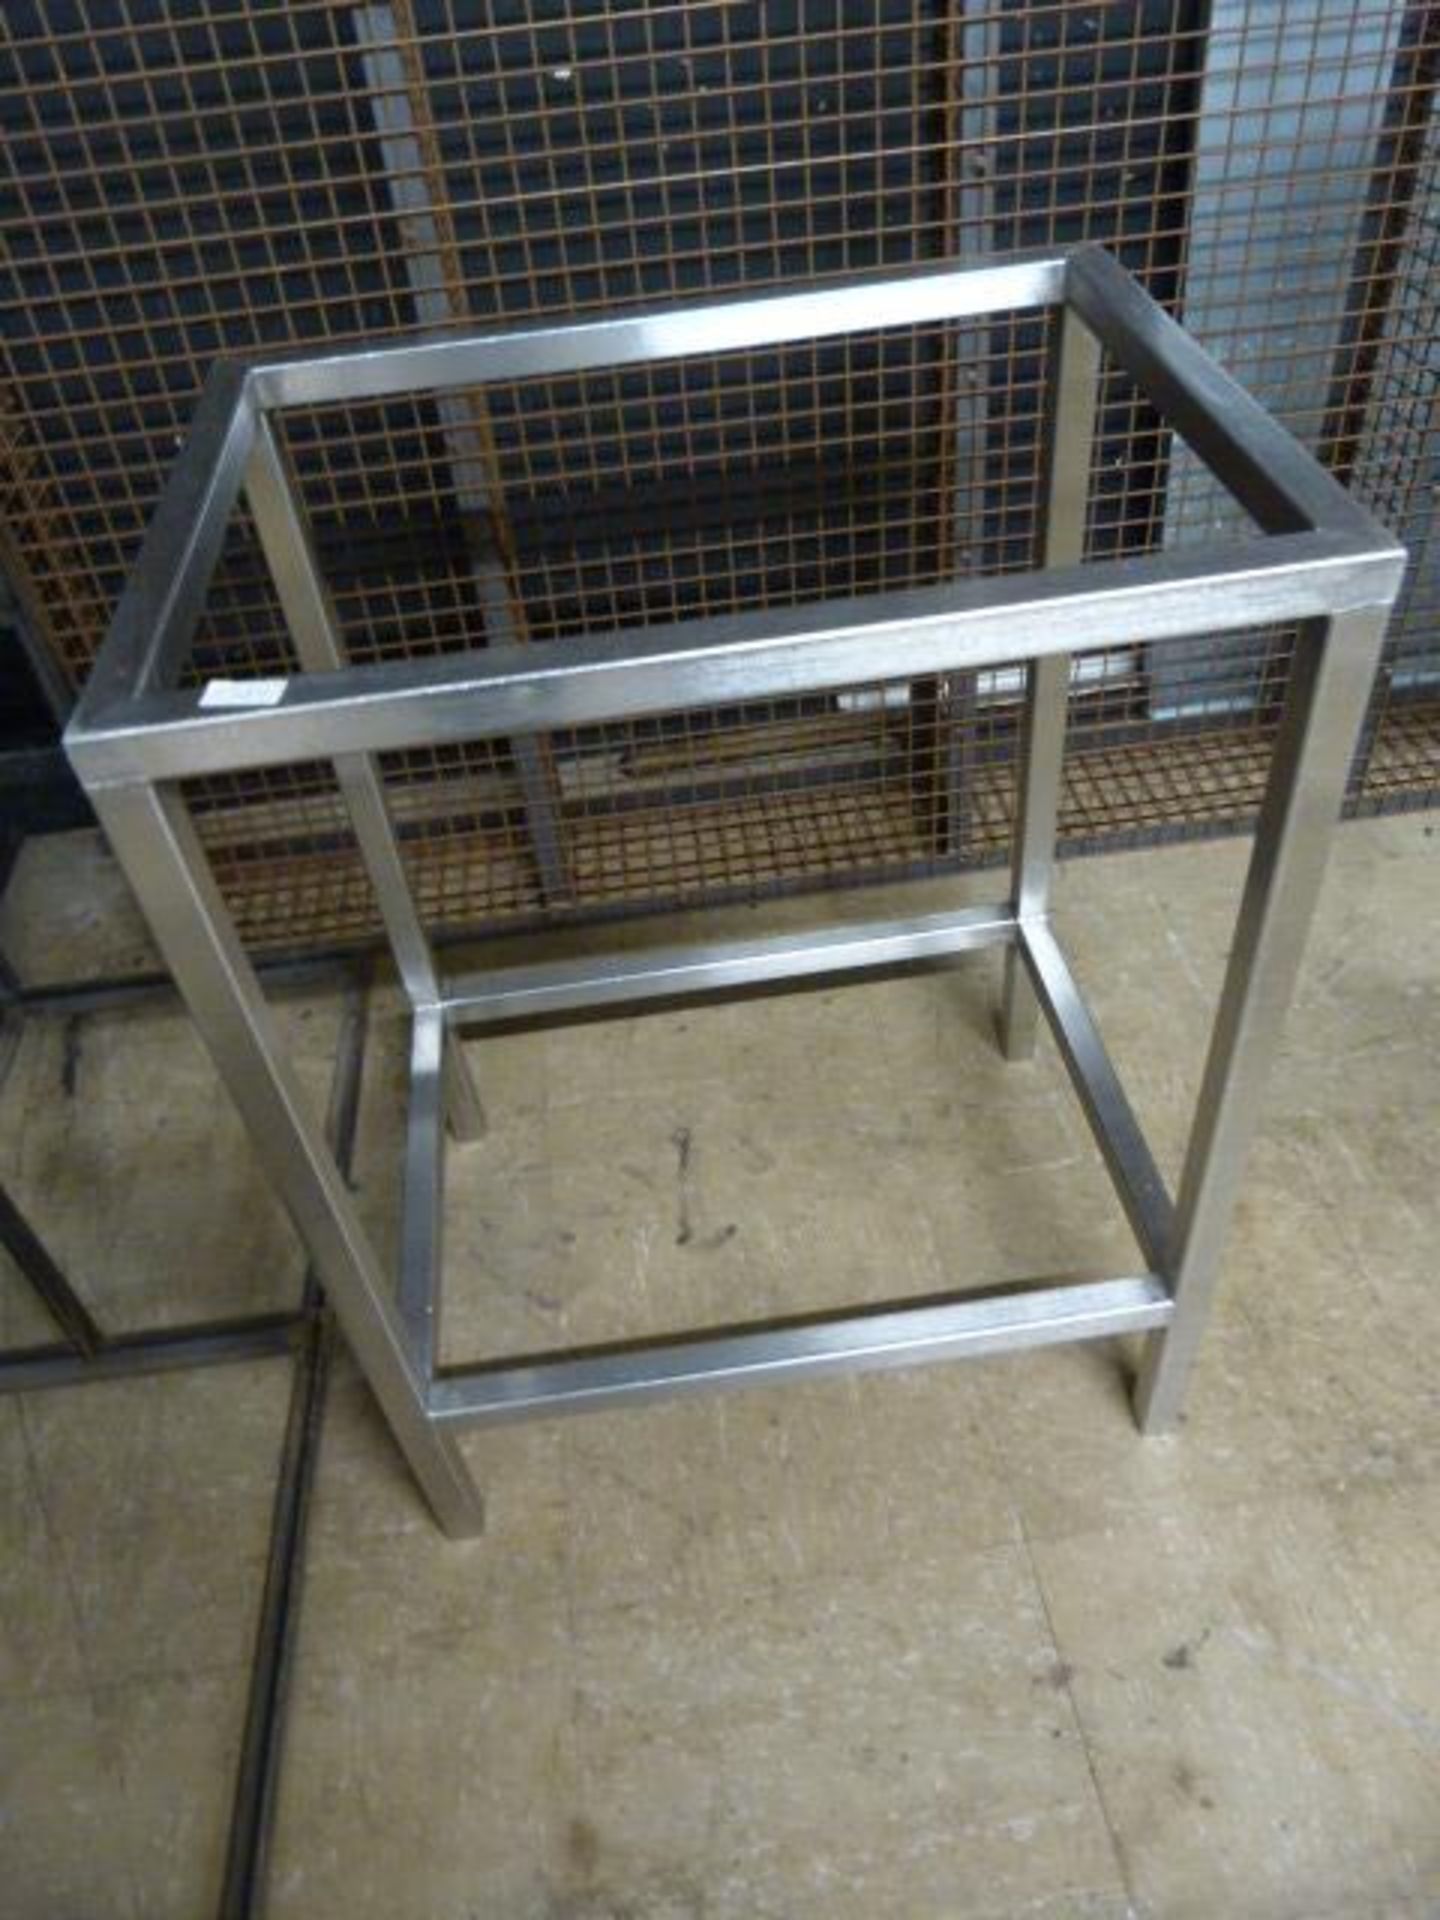 *Stainless Steel Stand ~51x38.5x67cm